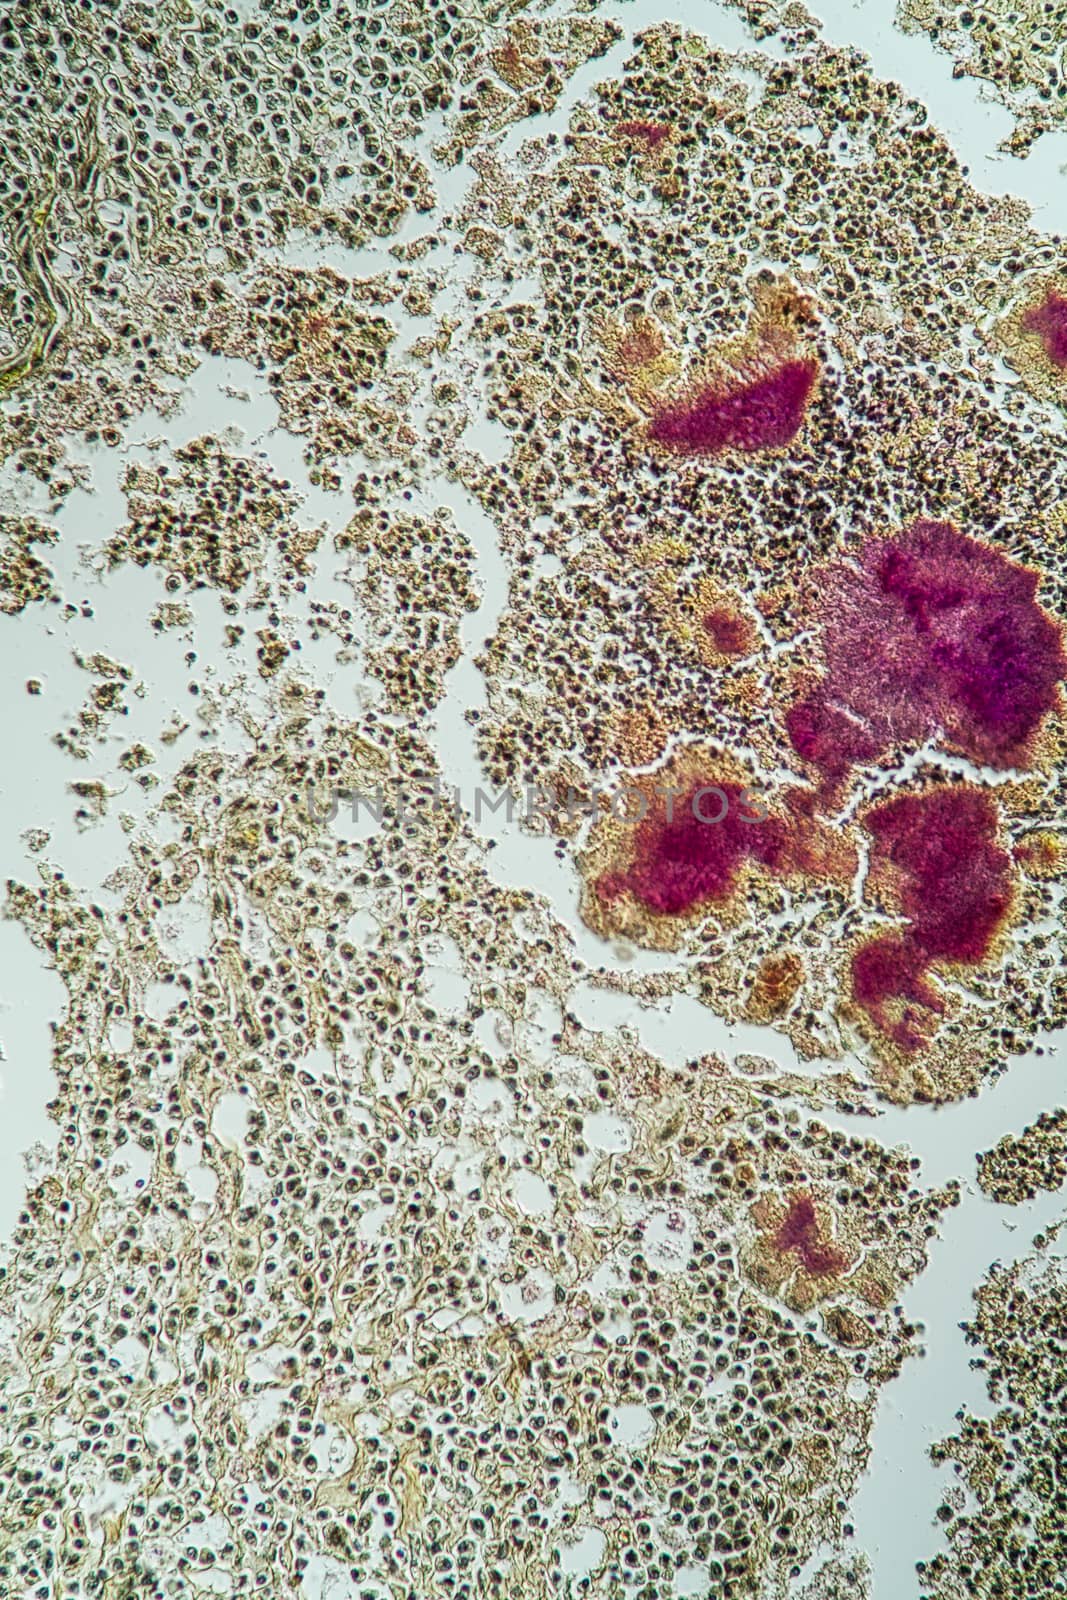 Actinomyces disease under the microscope 100x by Dr-Lange